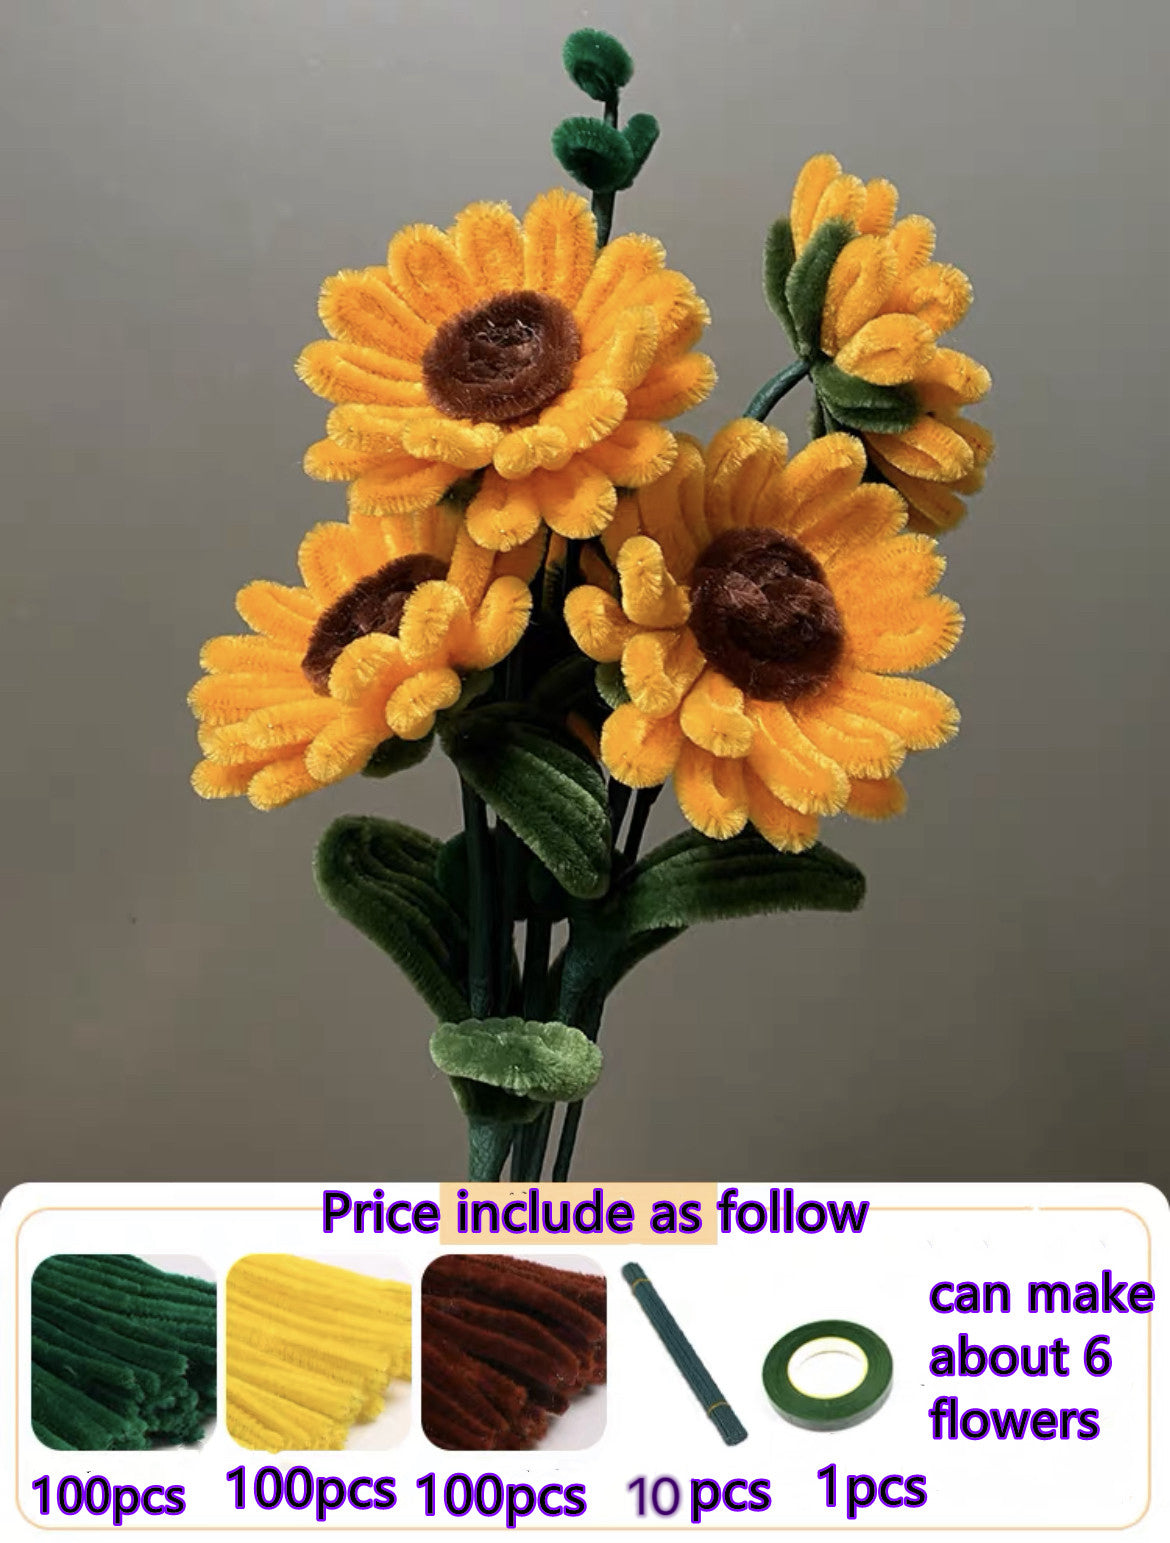 Kids Craft: Pipe Cleaner Sunflowers